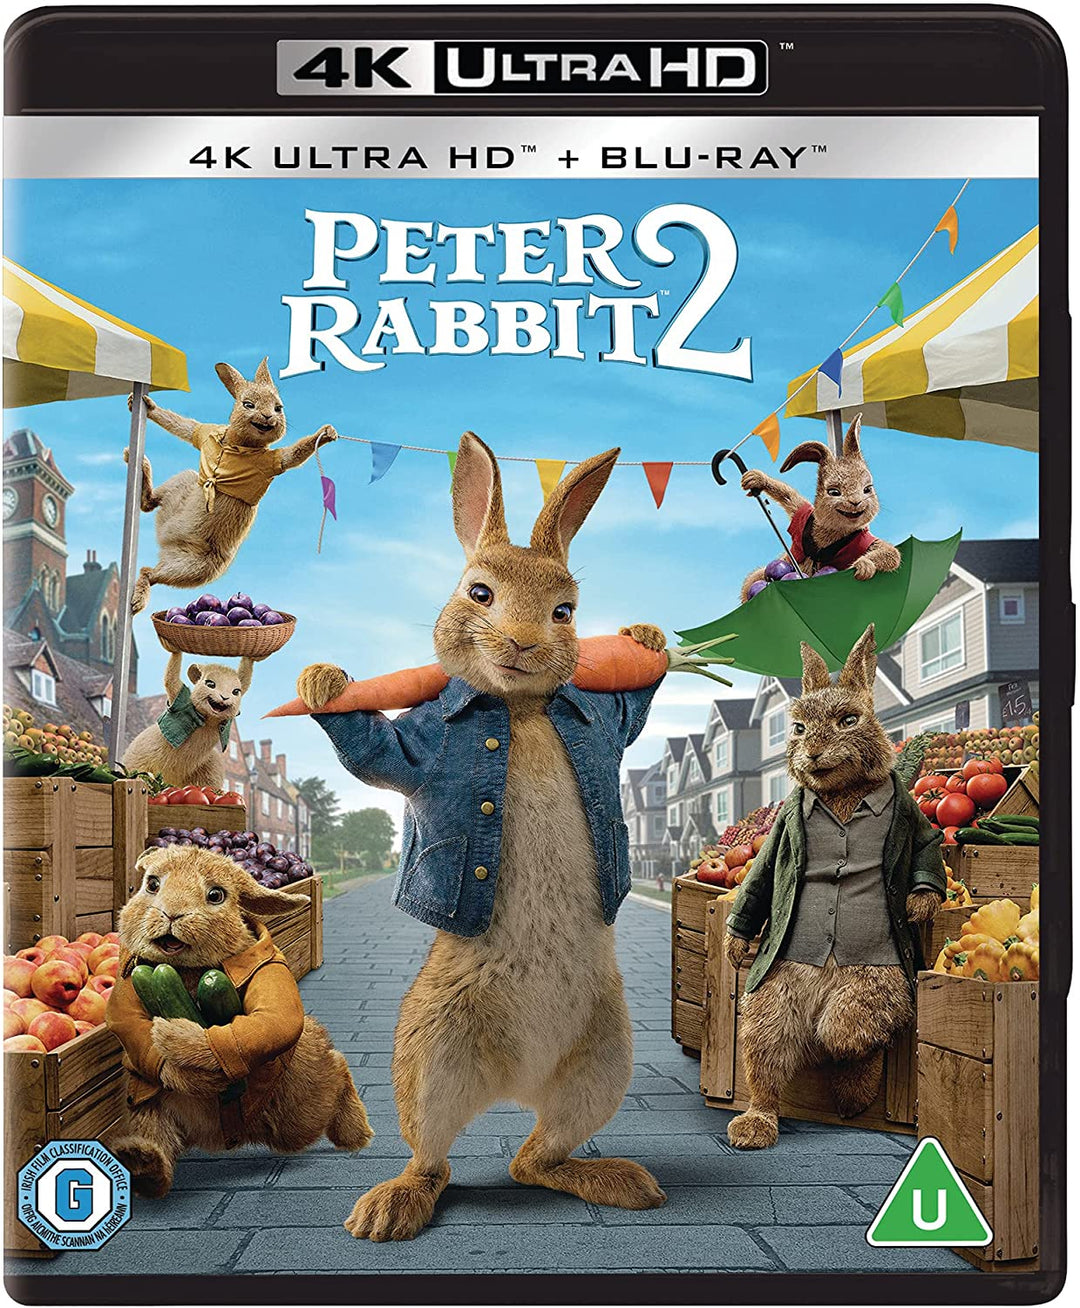 Peter Rabbit 2 (2 DISCS - UHD and BD) [Region Free] - Family/Comedy [Blu-ray]